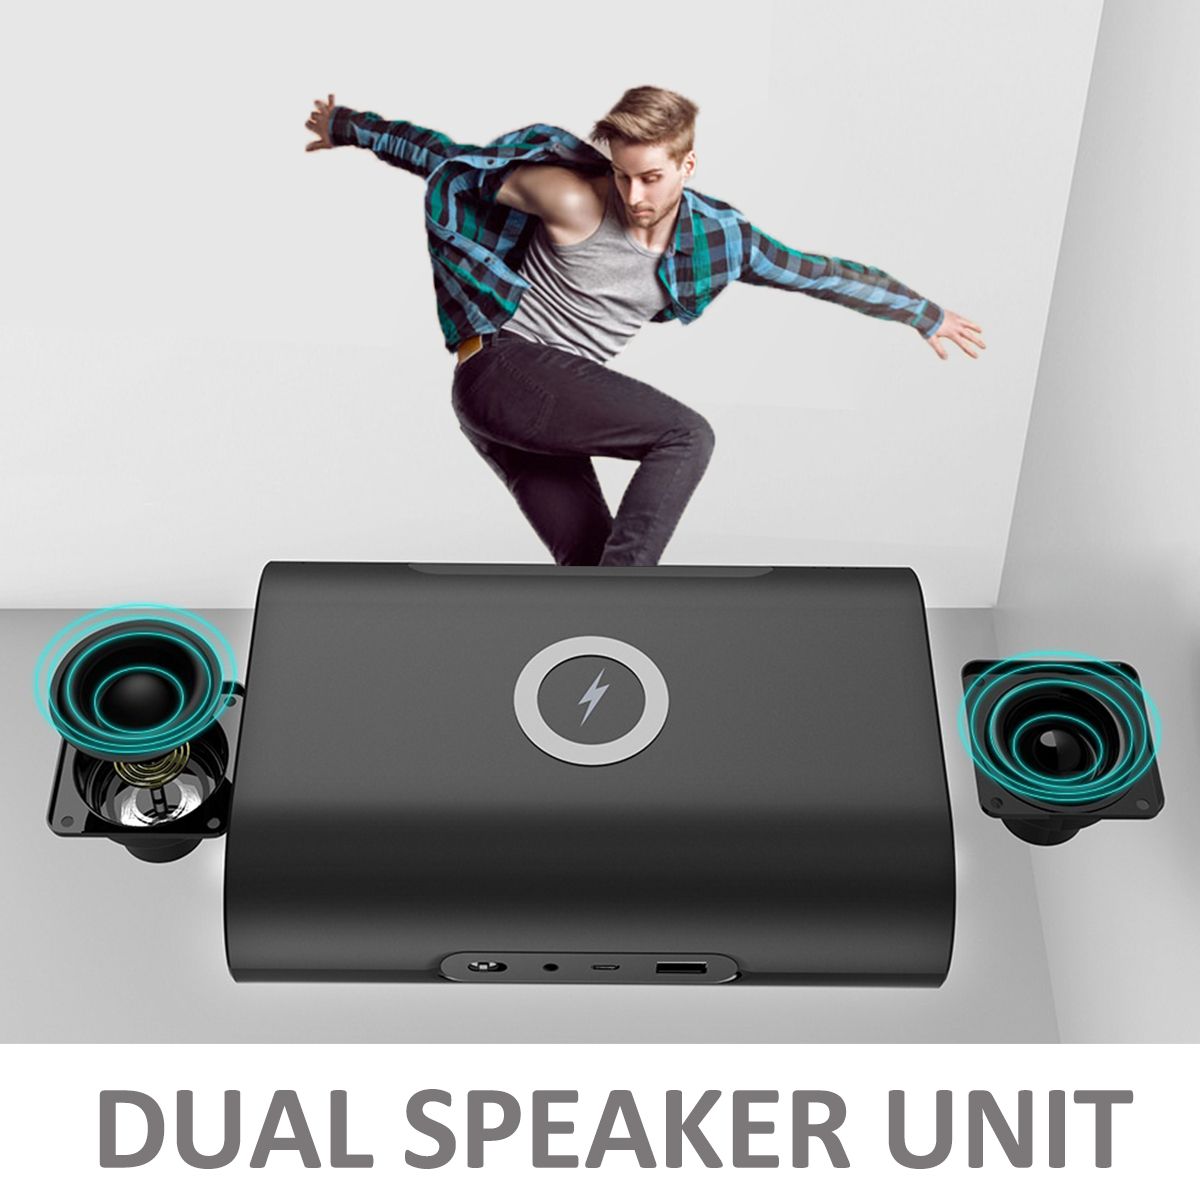 2-In-1-Portable-Wireless-Charger-bluetooth-Speaker-Stereo-Noise-Reduction-Headset-With-Power-Bank-1366167